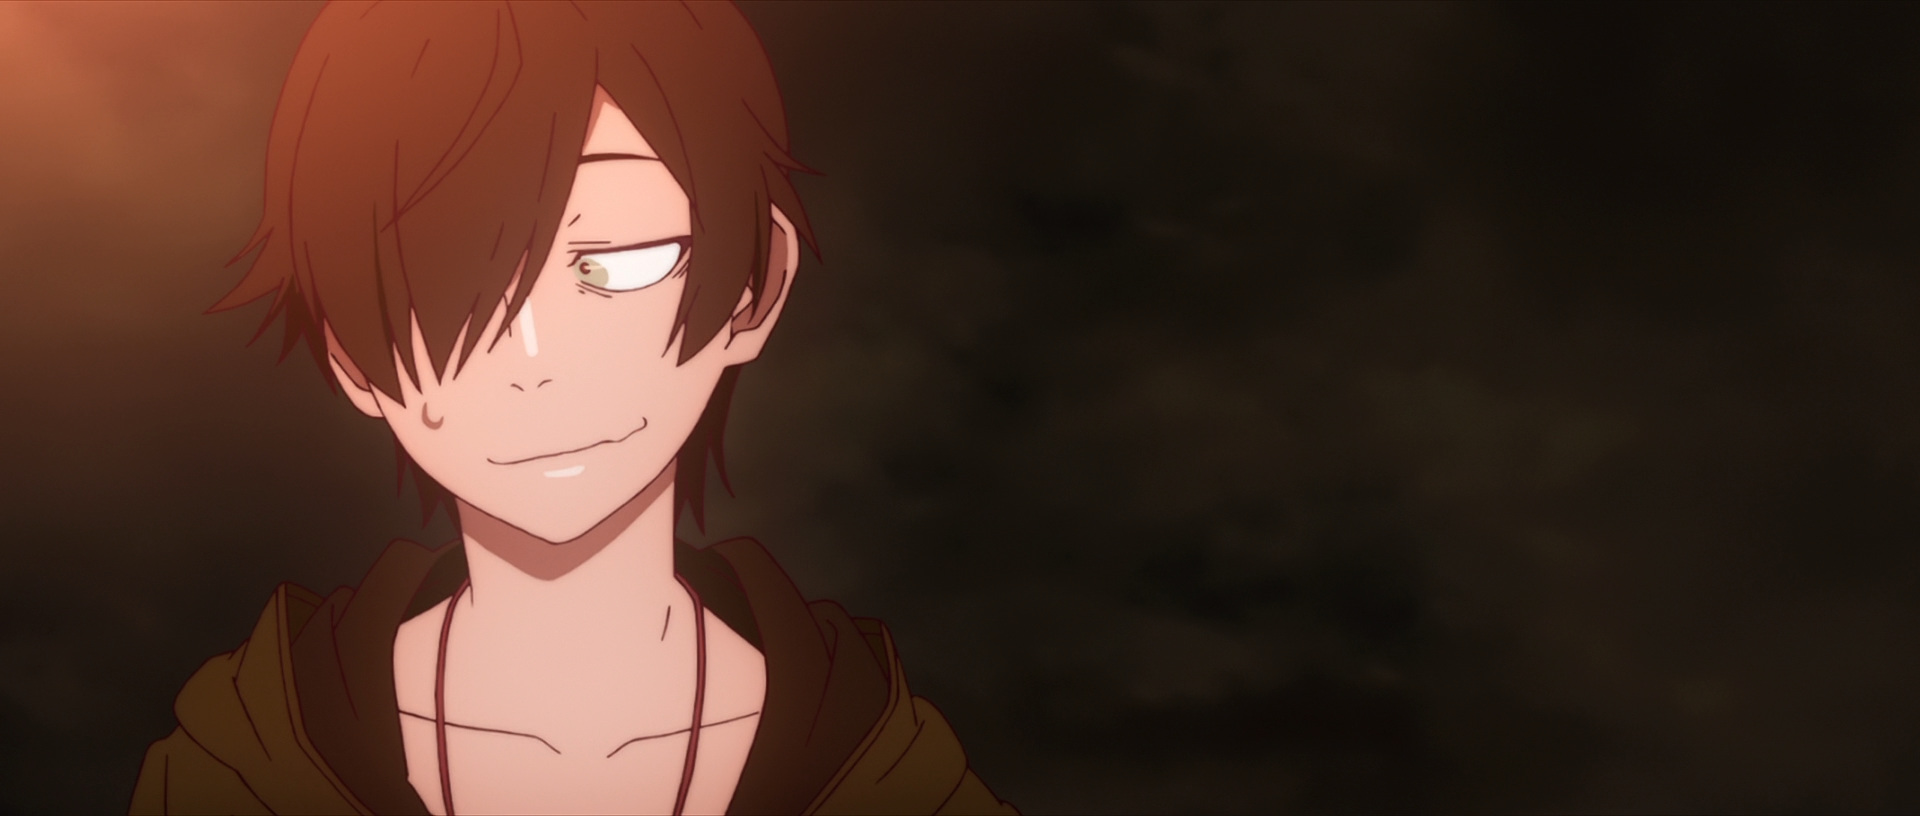 Throughout this movie one will see Araragi learn what it means to be a vamp...